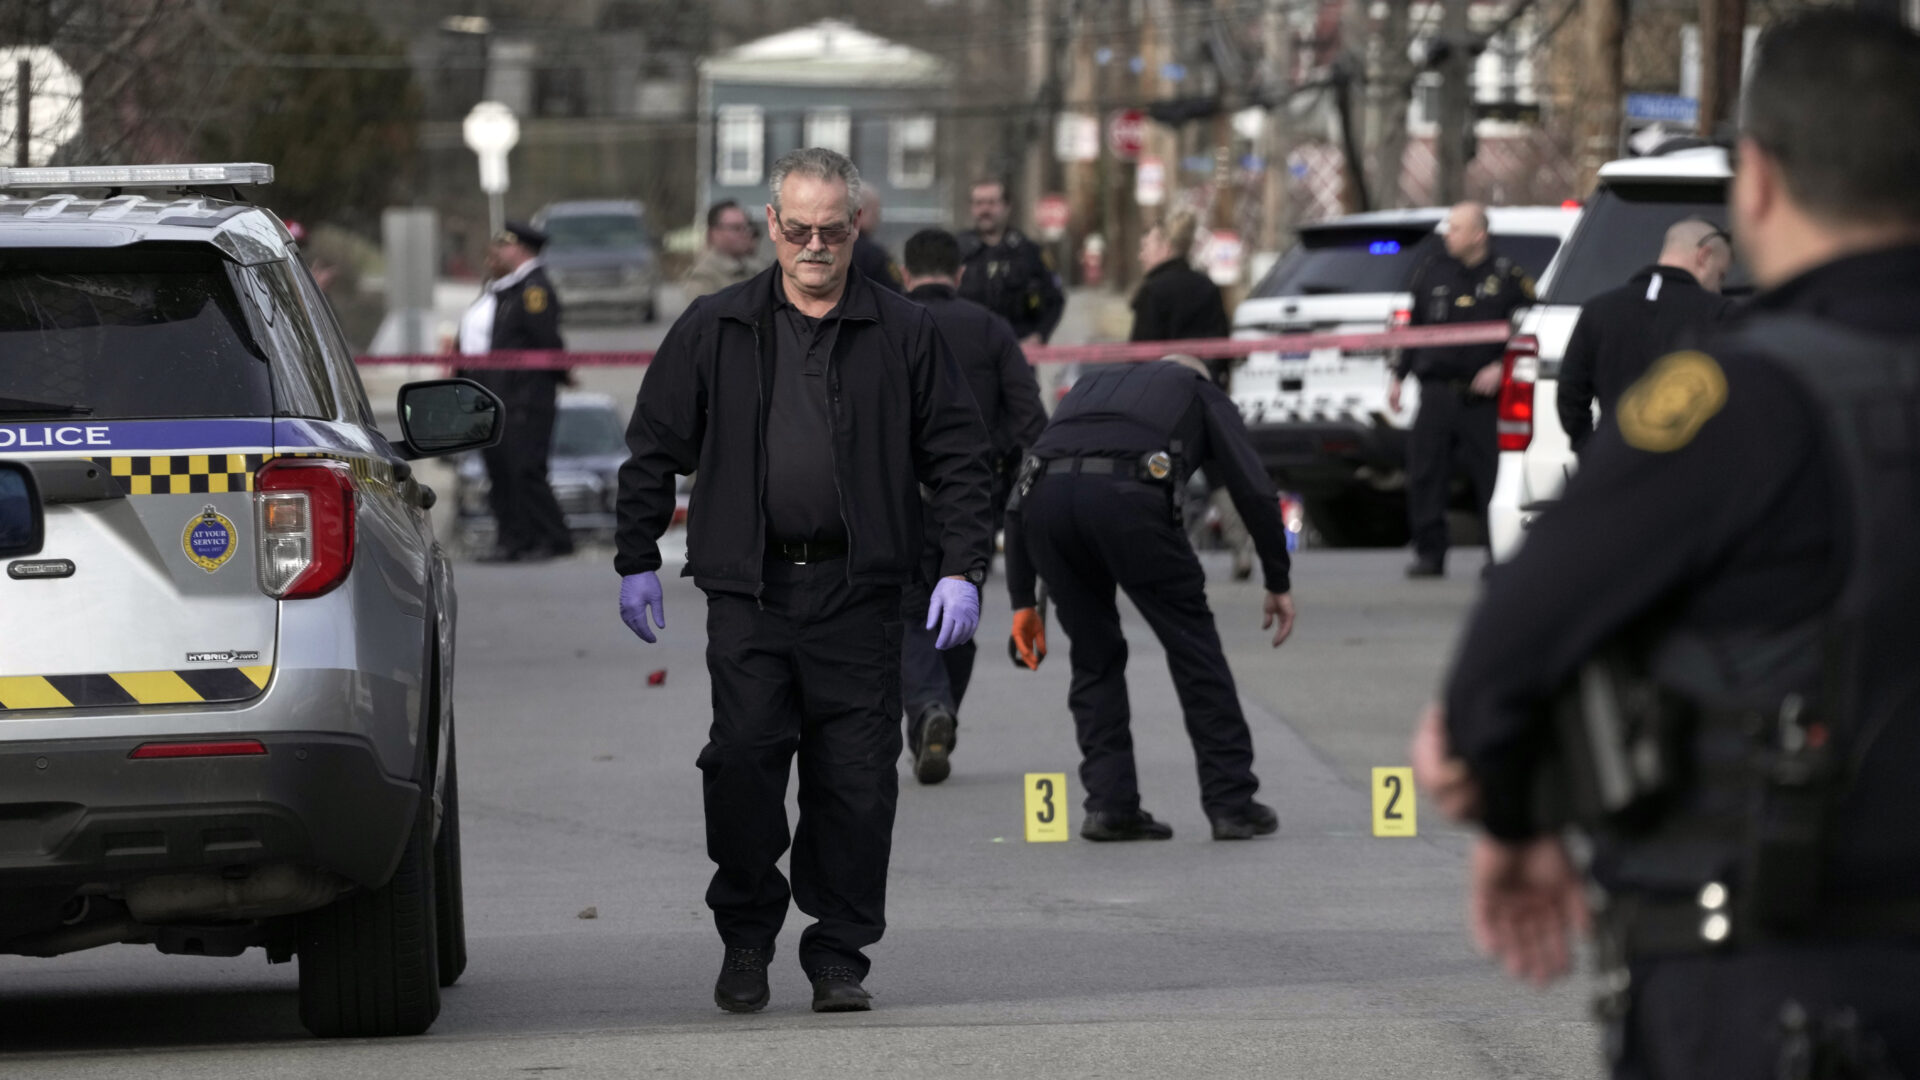 The Pittsburgh Police Crime Scene Investigation unit works the scene outside Westinghouse Academy where Pittsburgh Public Safety and school officials said four students were shot as school was dismissed, Tuesday, Feb. 14, 2023, in the Homewood neighborhood of Pittsburgh. No life-threatening injuries have been reported, police said. 